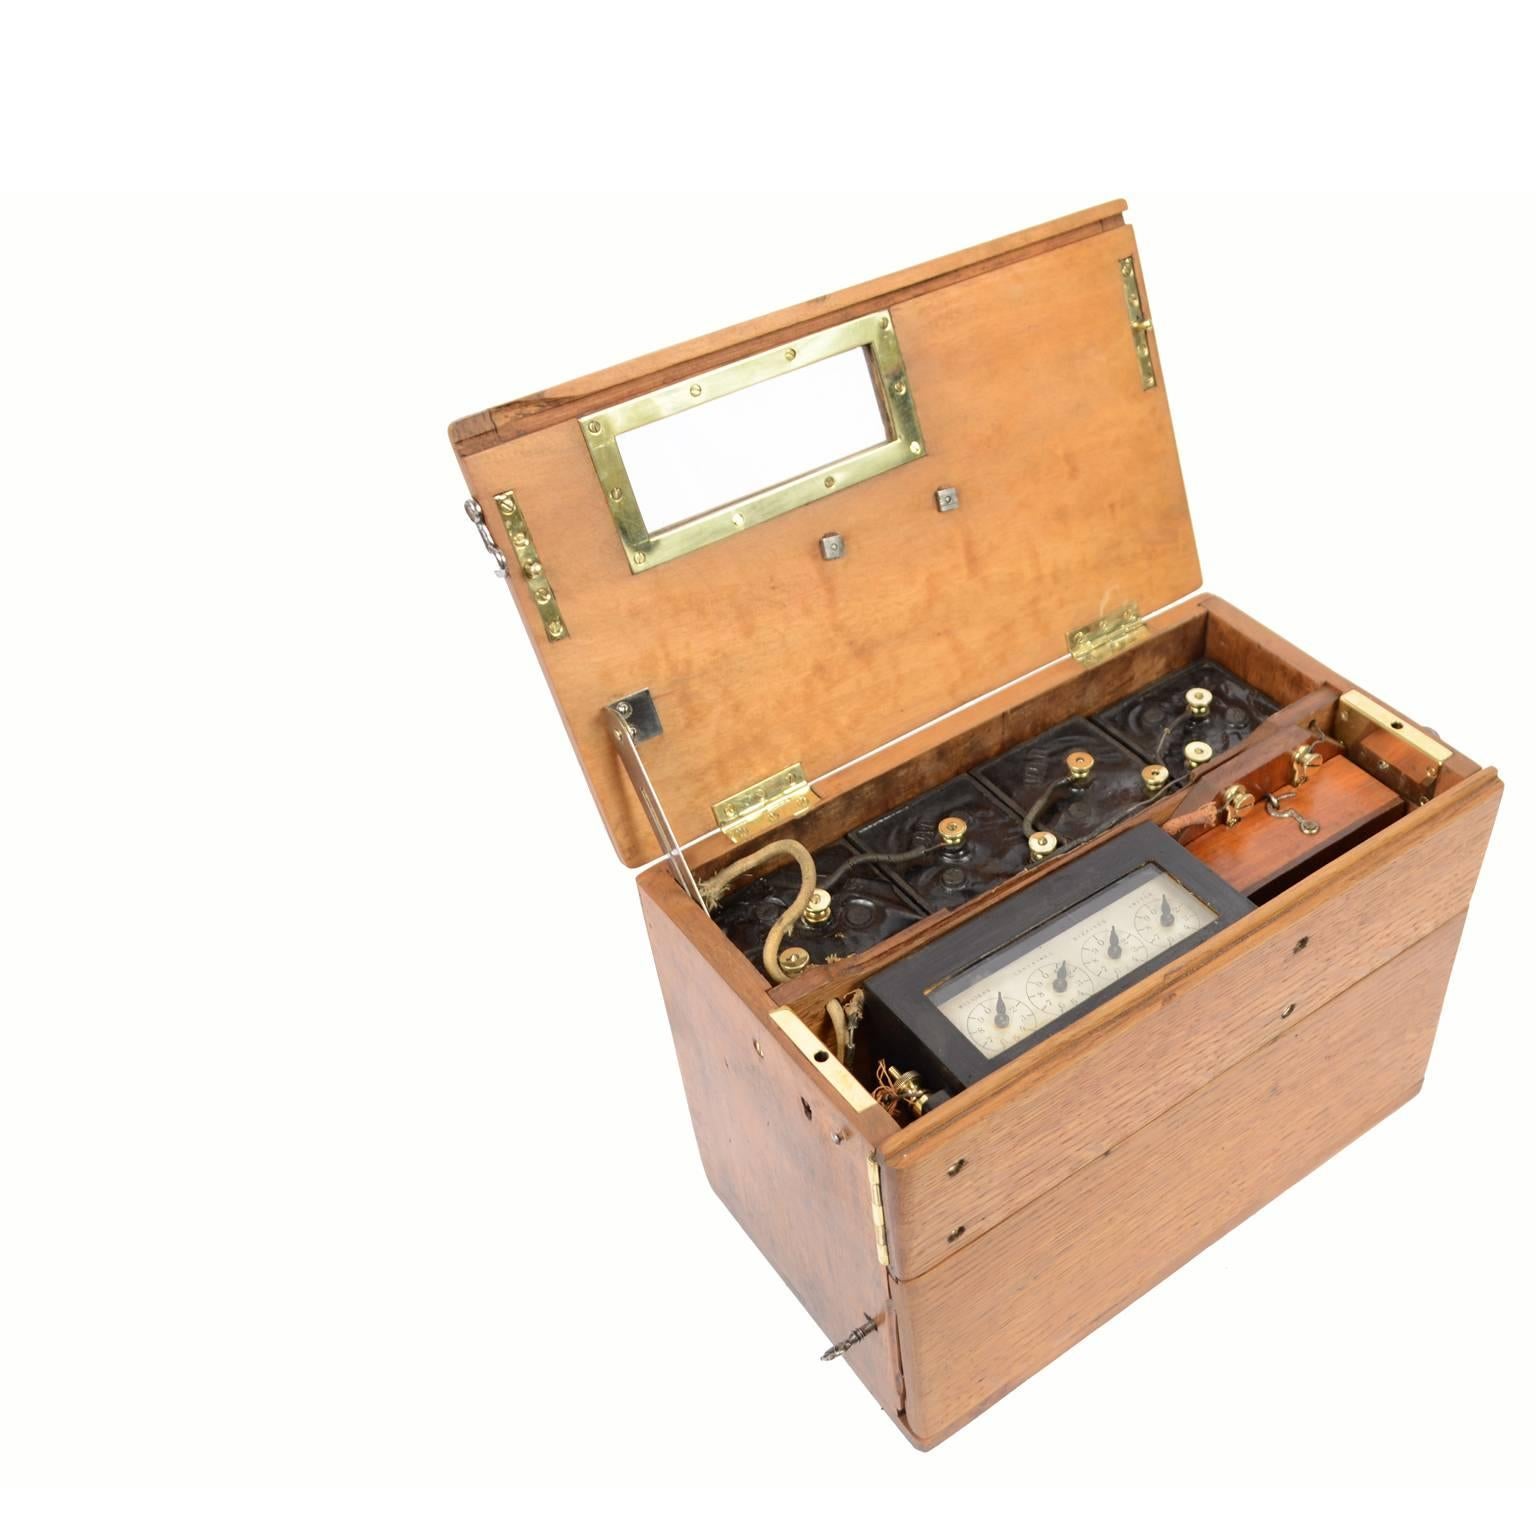 Late 19th Century Telegraph power supply in its Oakwood Box of the Second Half of the 19th Century